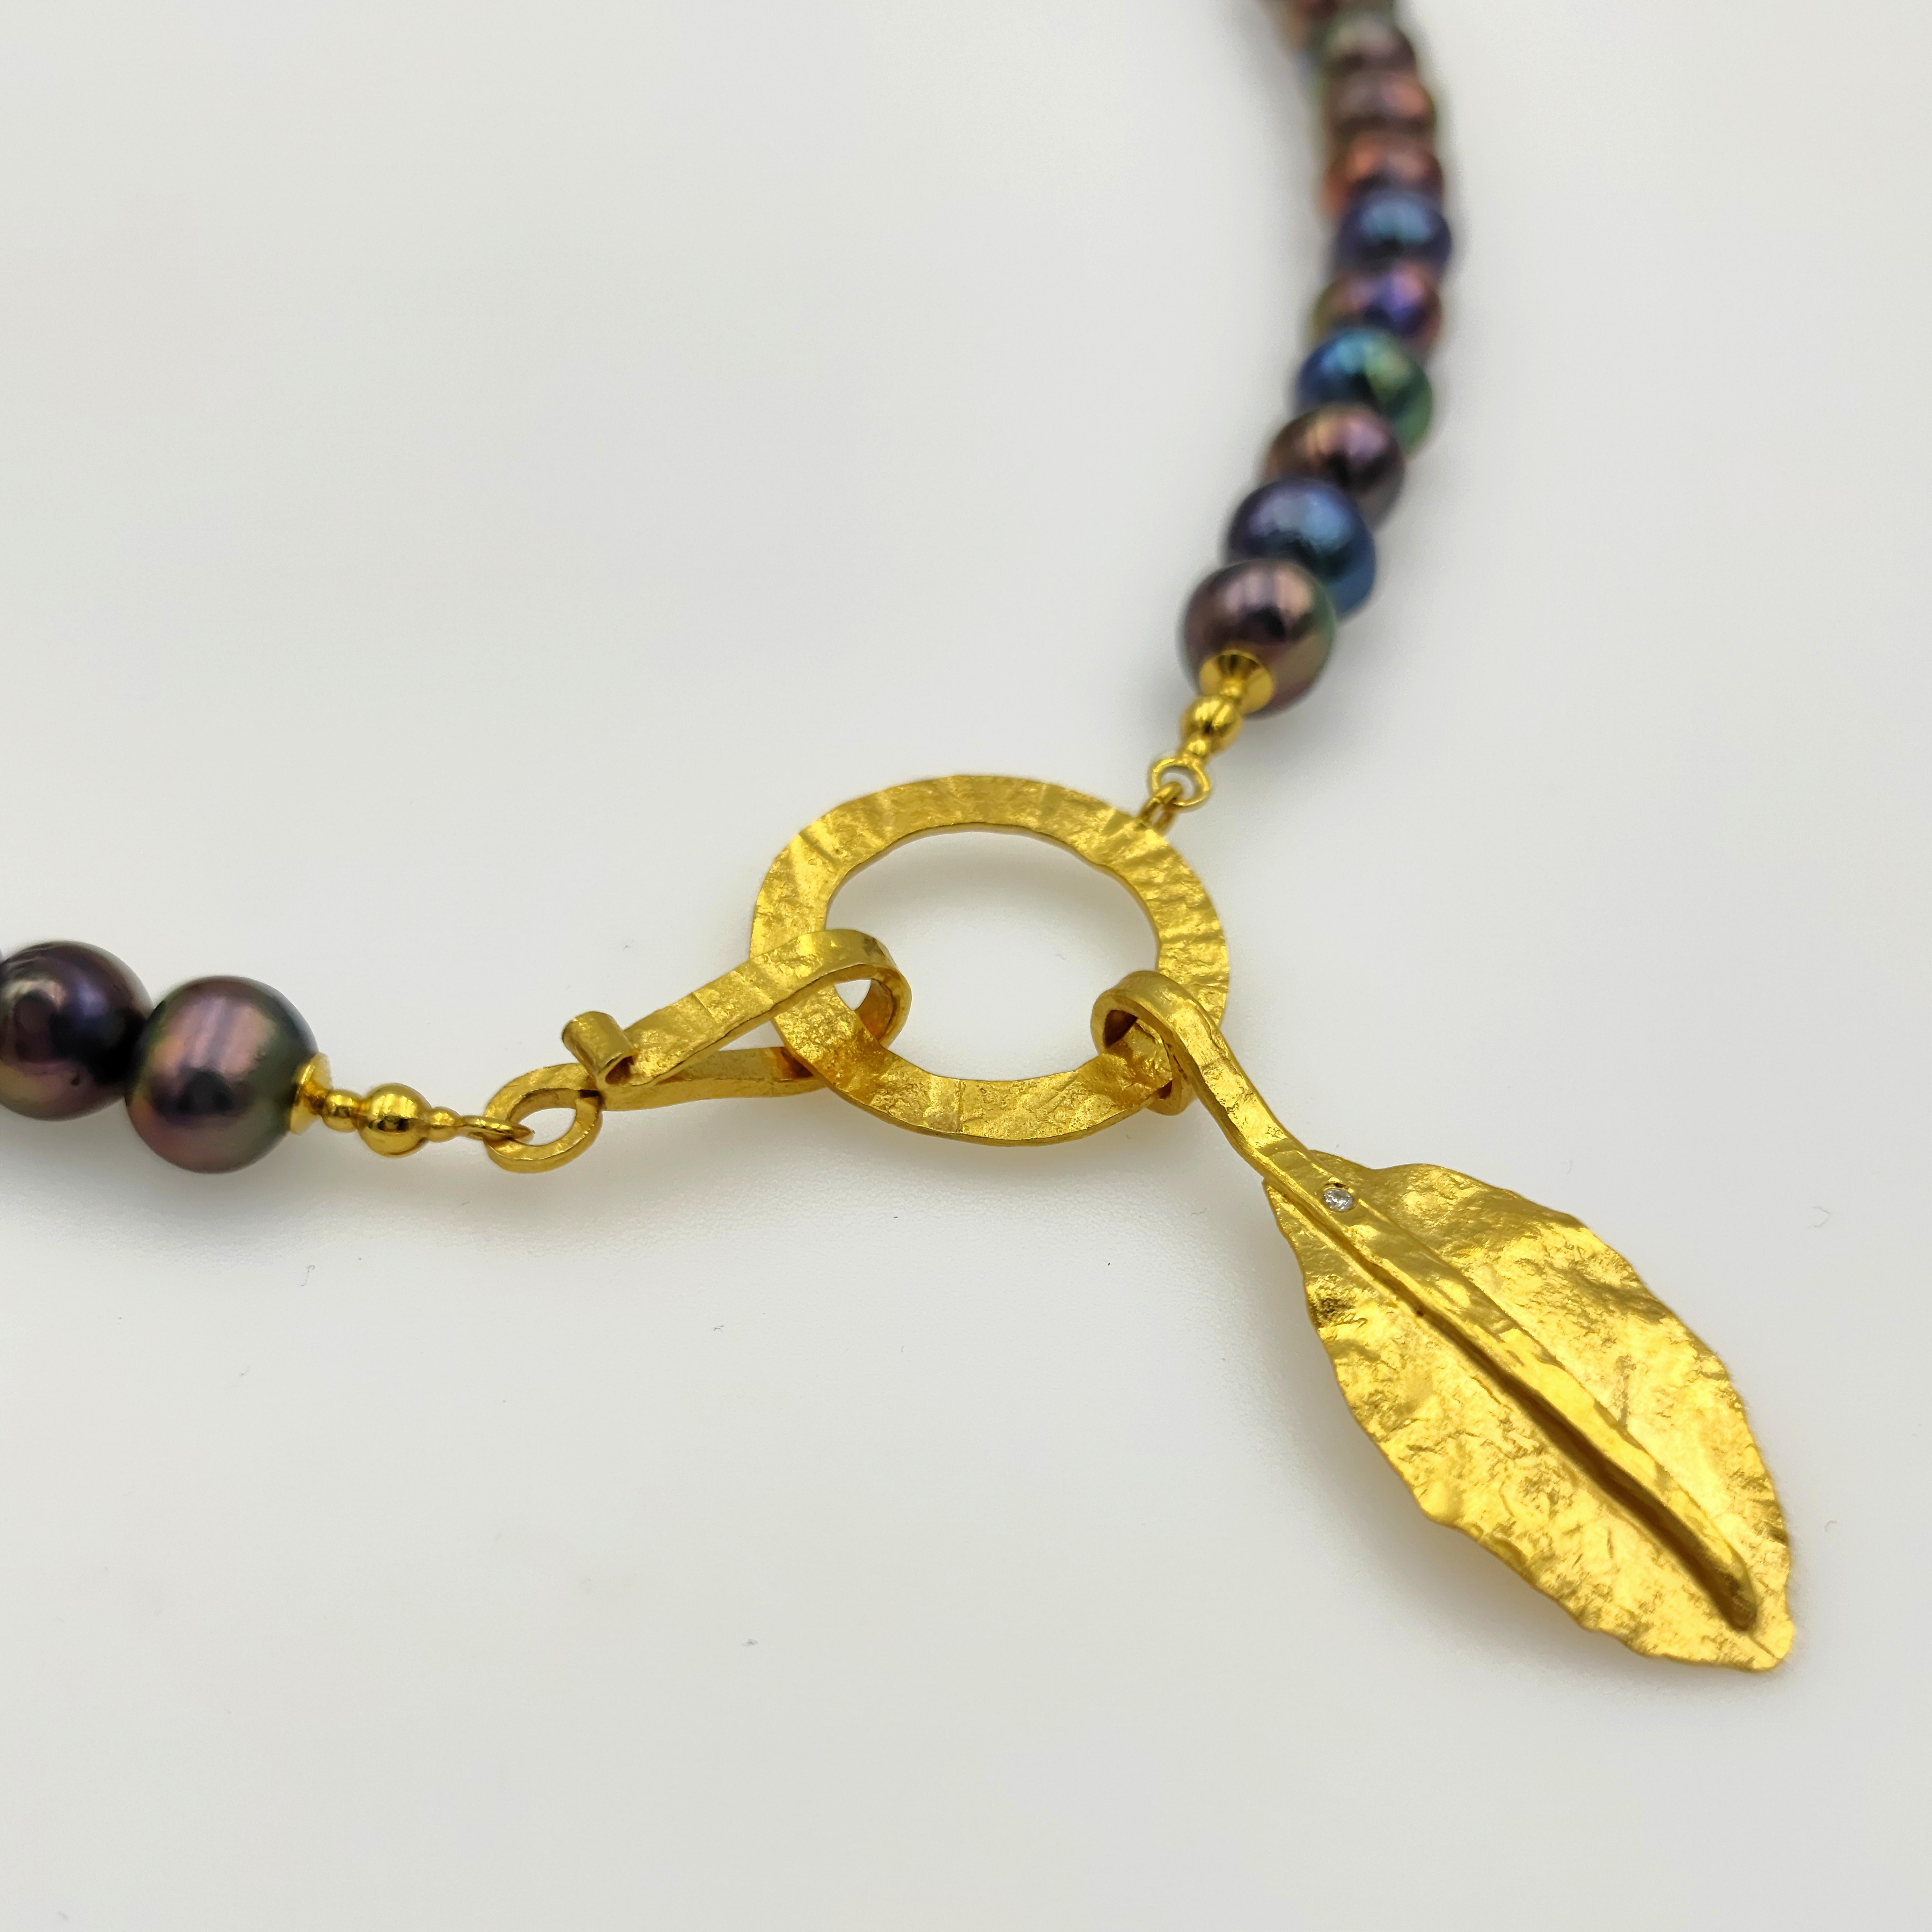 Freshwater Pearl Zircon Gold Plate Silver Hand Made Artist Rope Beaded Necklace
I love archeology, the art of antiquity. He is a great inspiration for me!
Simple in form, the hand made necklace is inspired by ancient Greek art. Beautiful shimmering